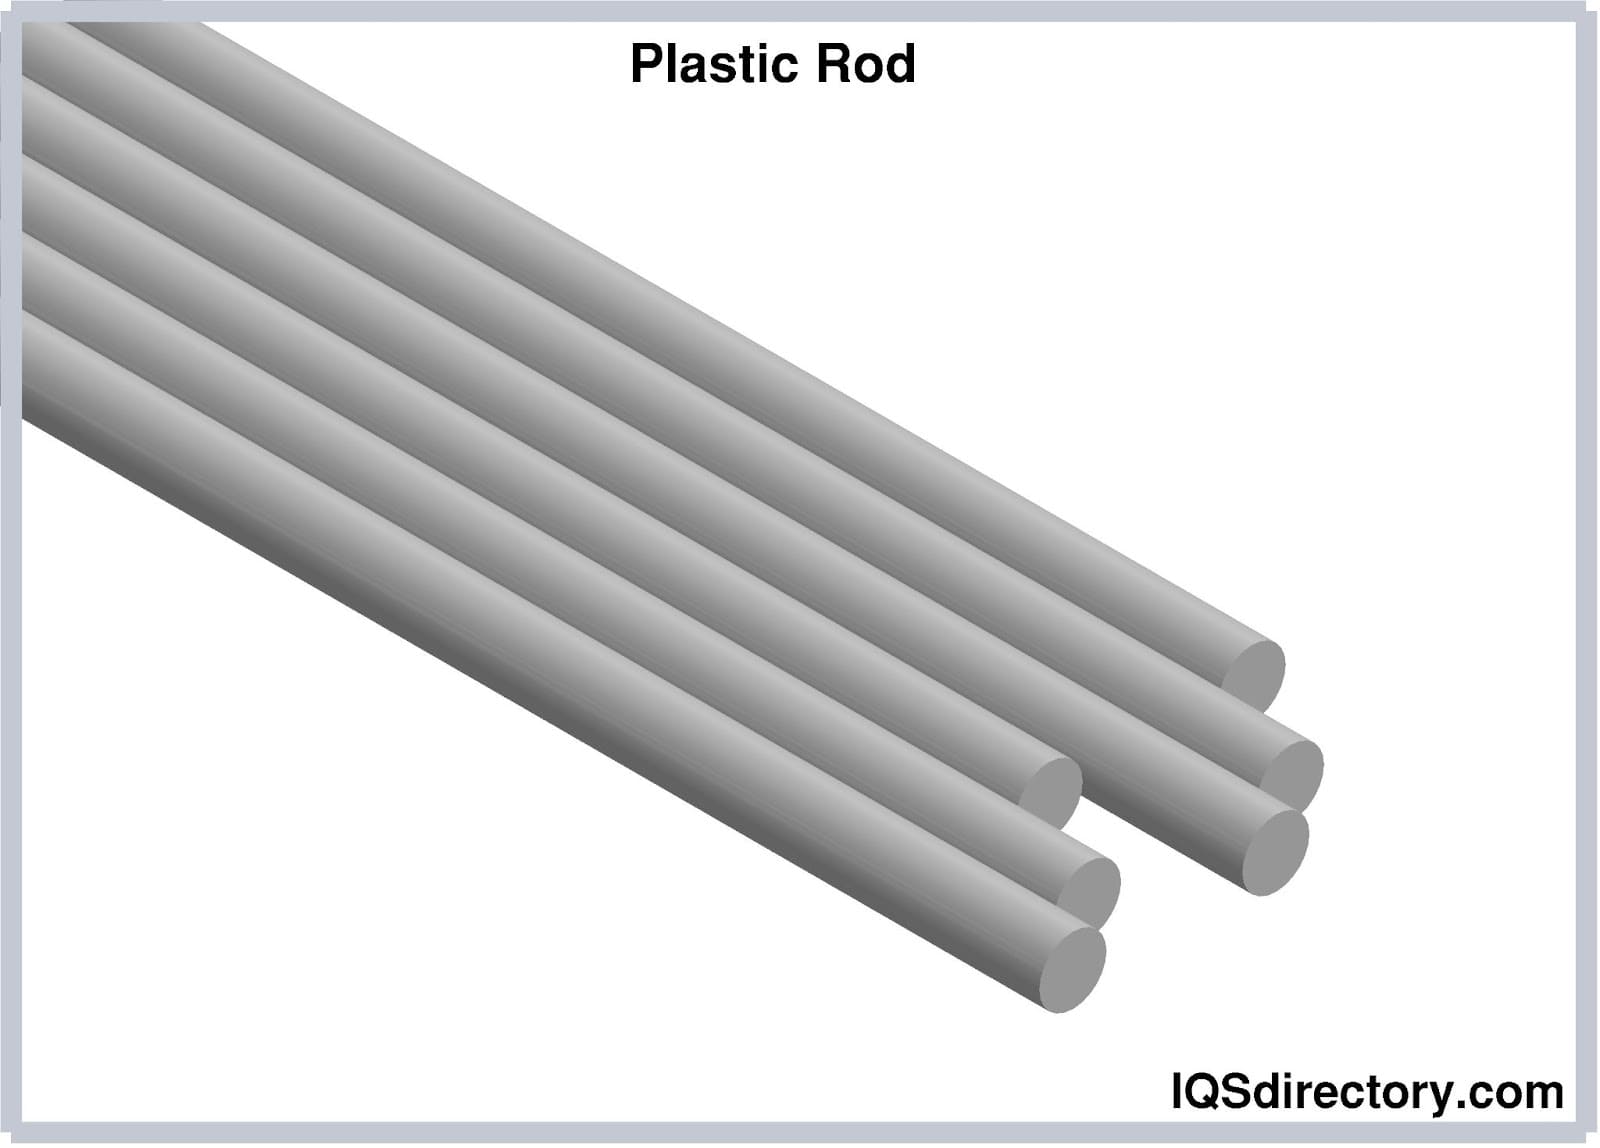 rod holder pvc, rod holder pvc Suppliers and Manufacturers at